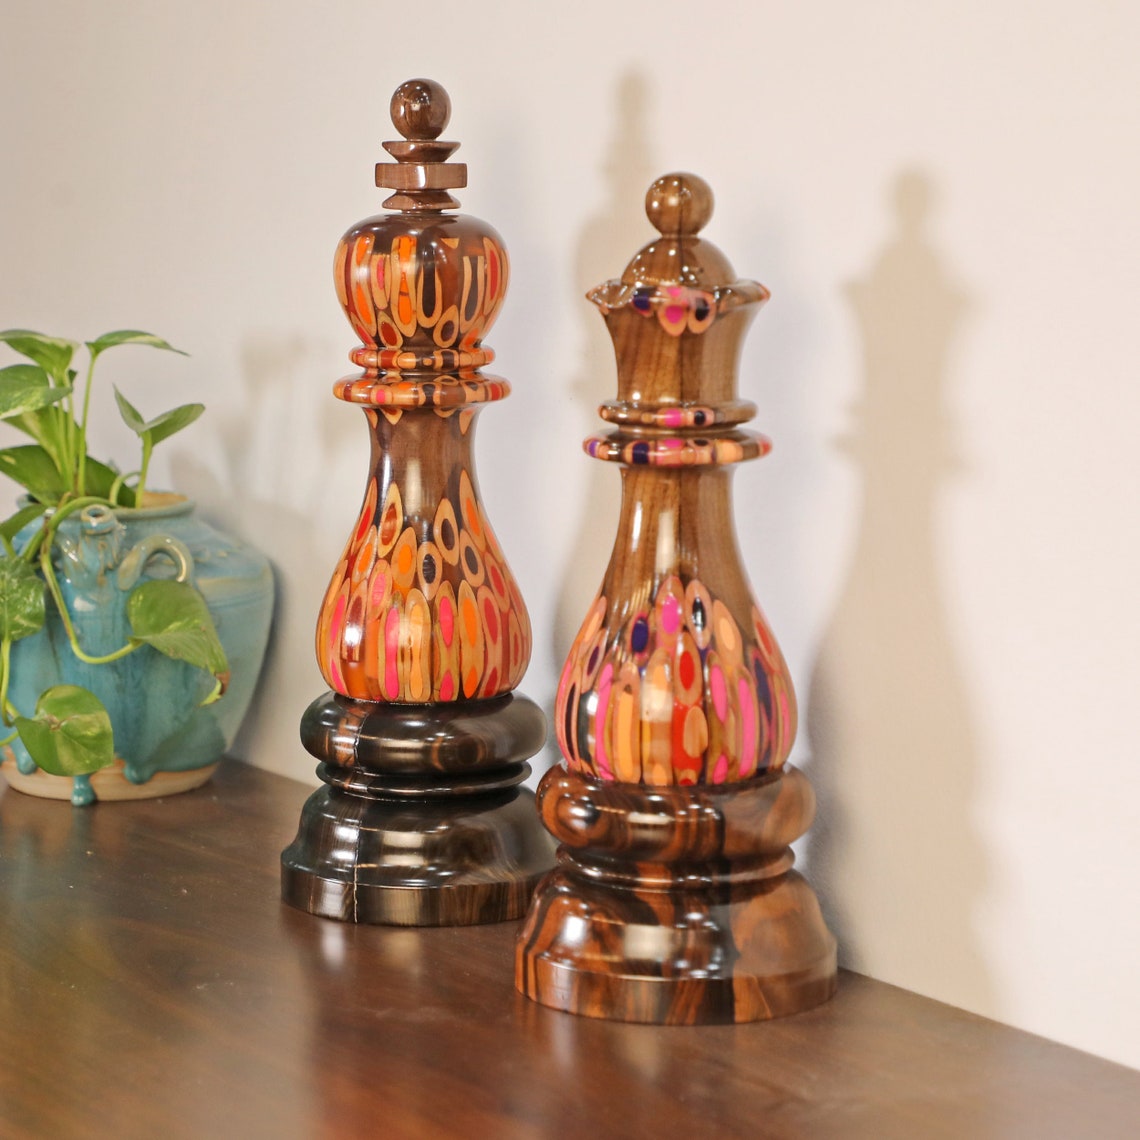 Giant Ornamental King and Queen- Chess Pieces Decor - Deluxe Serial (2)